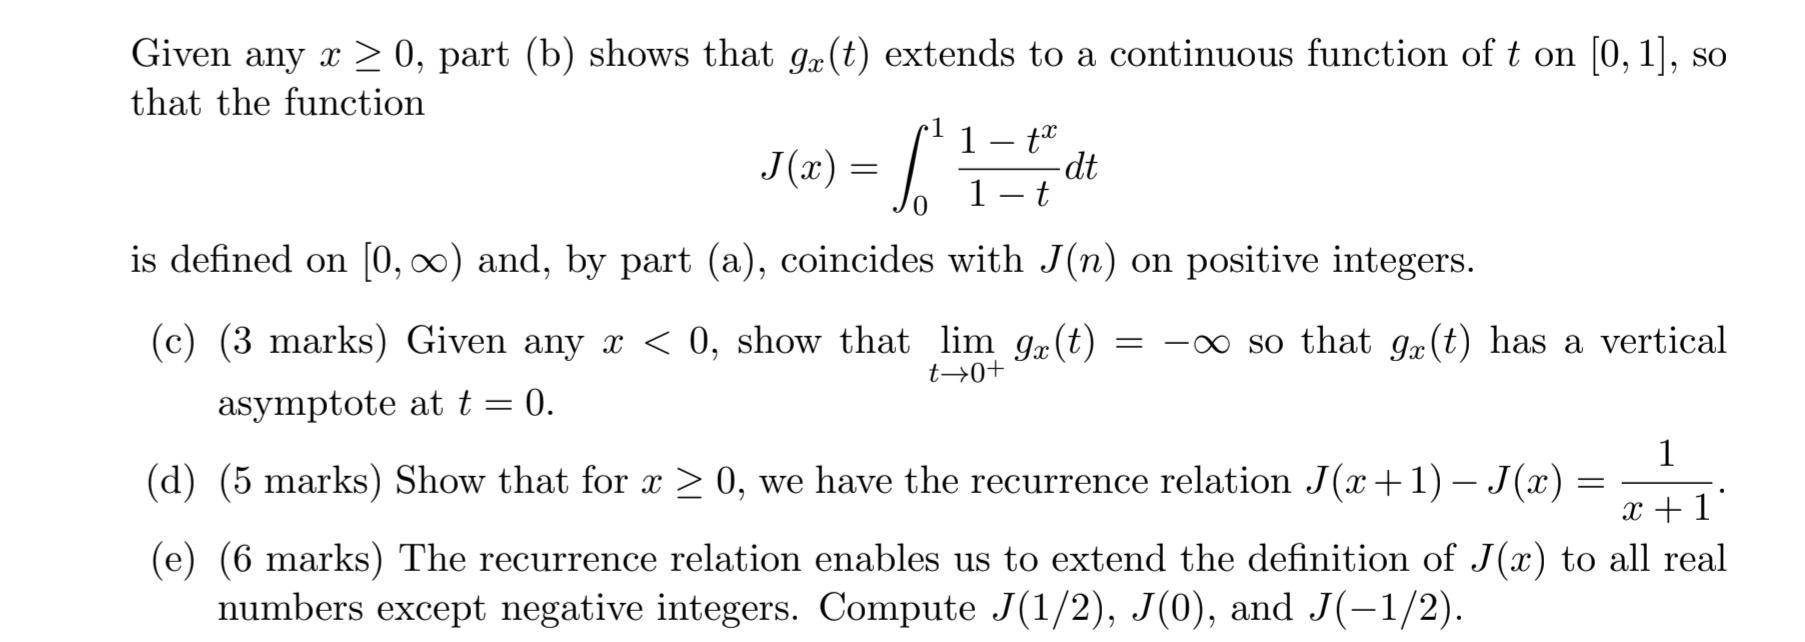 Given any x 20, part (b) shows that ga(t) extends to a continuous function of t on [0, 1], so that the